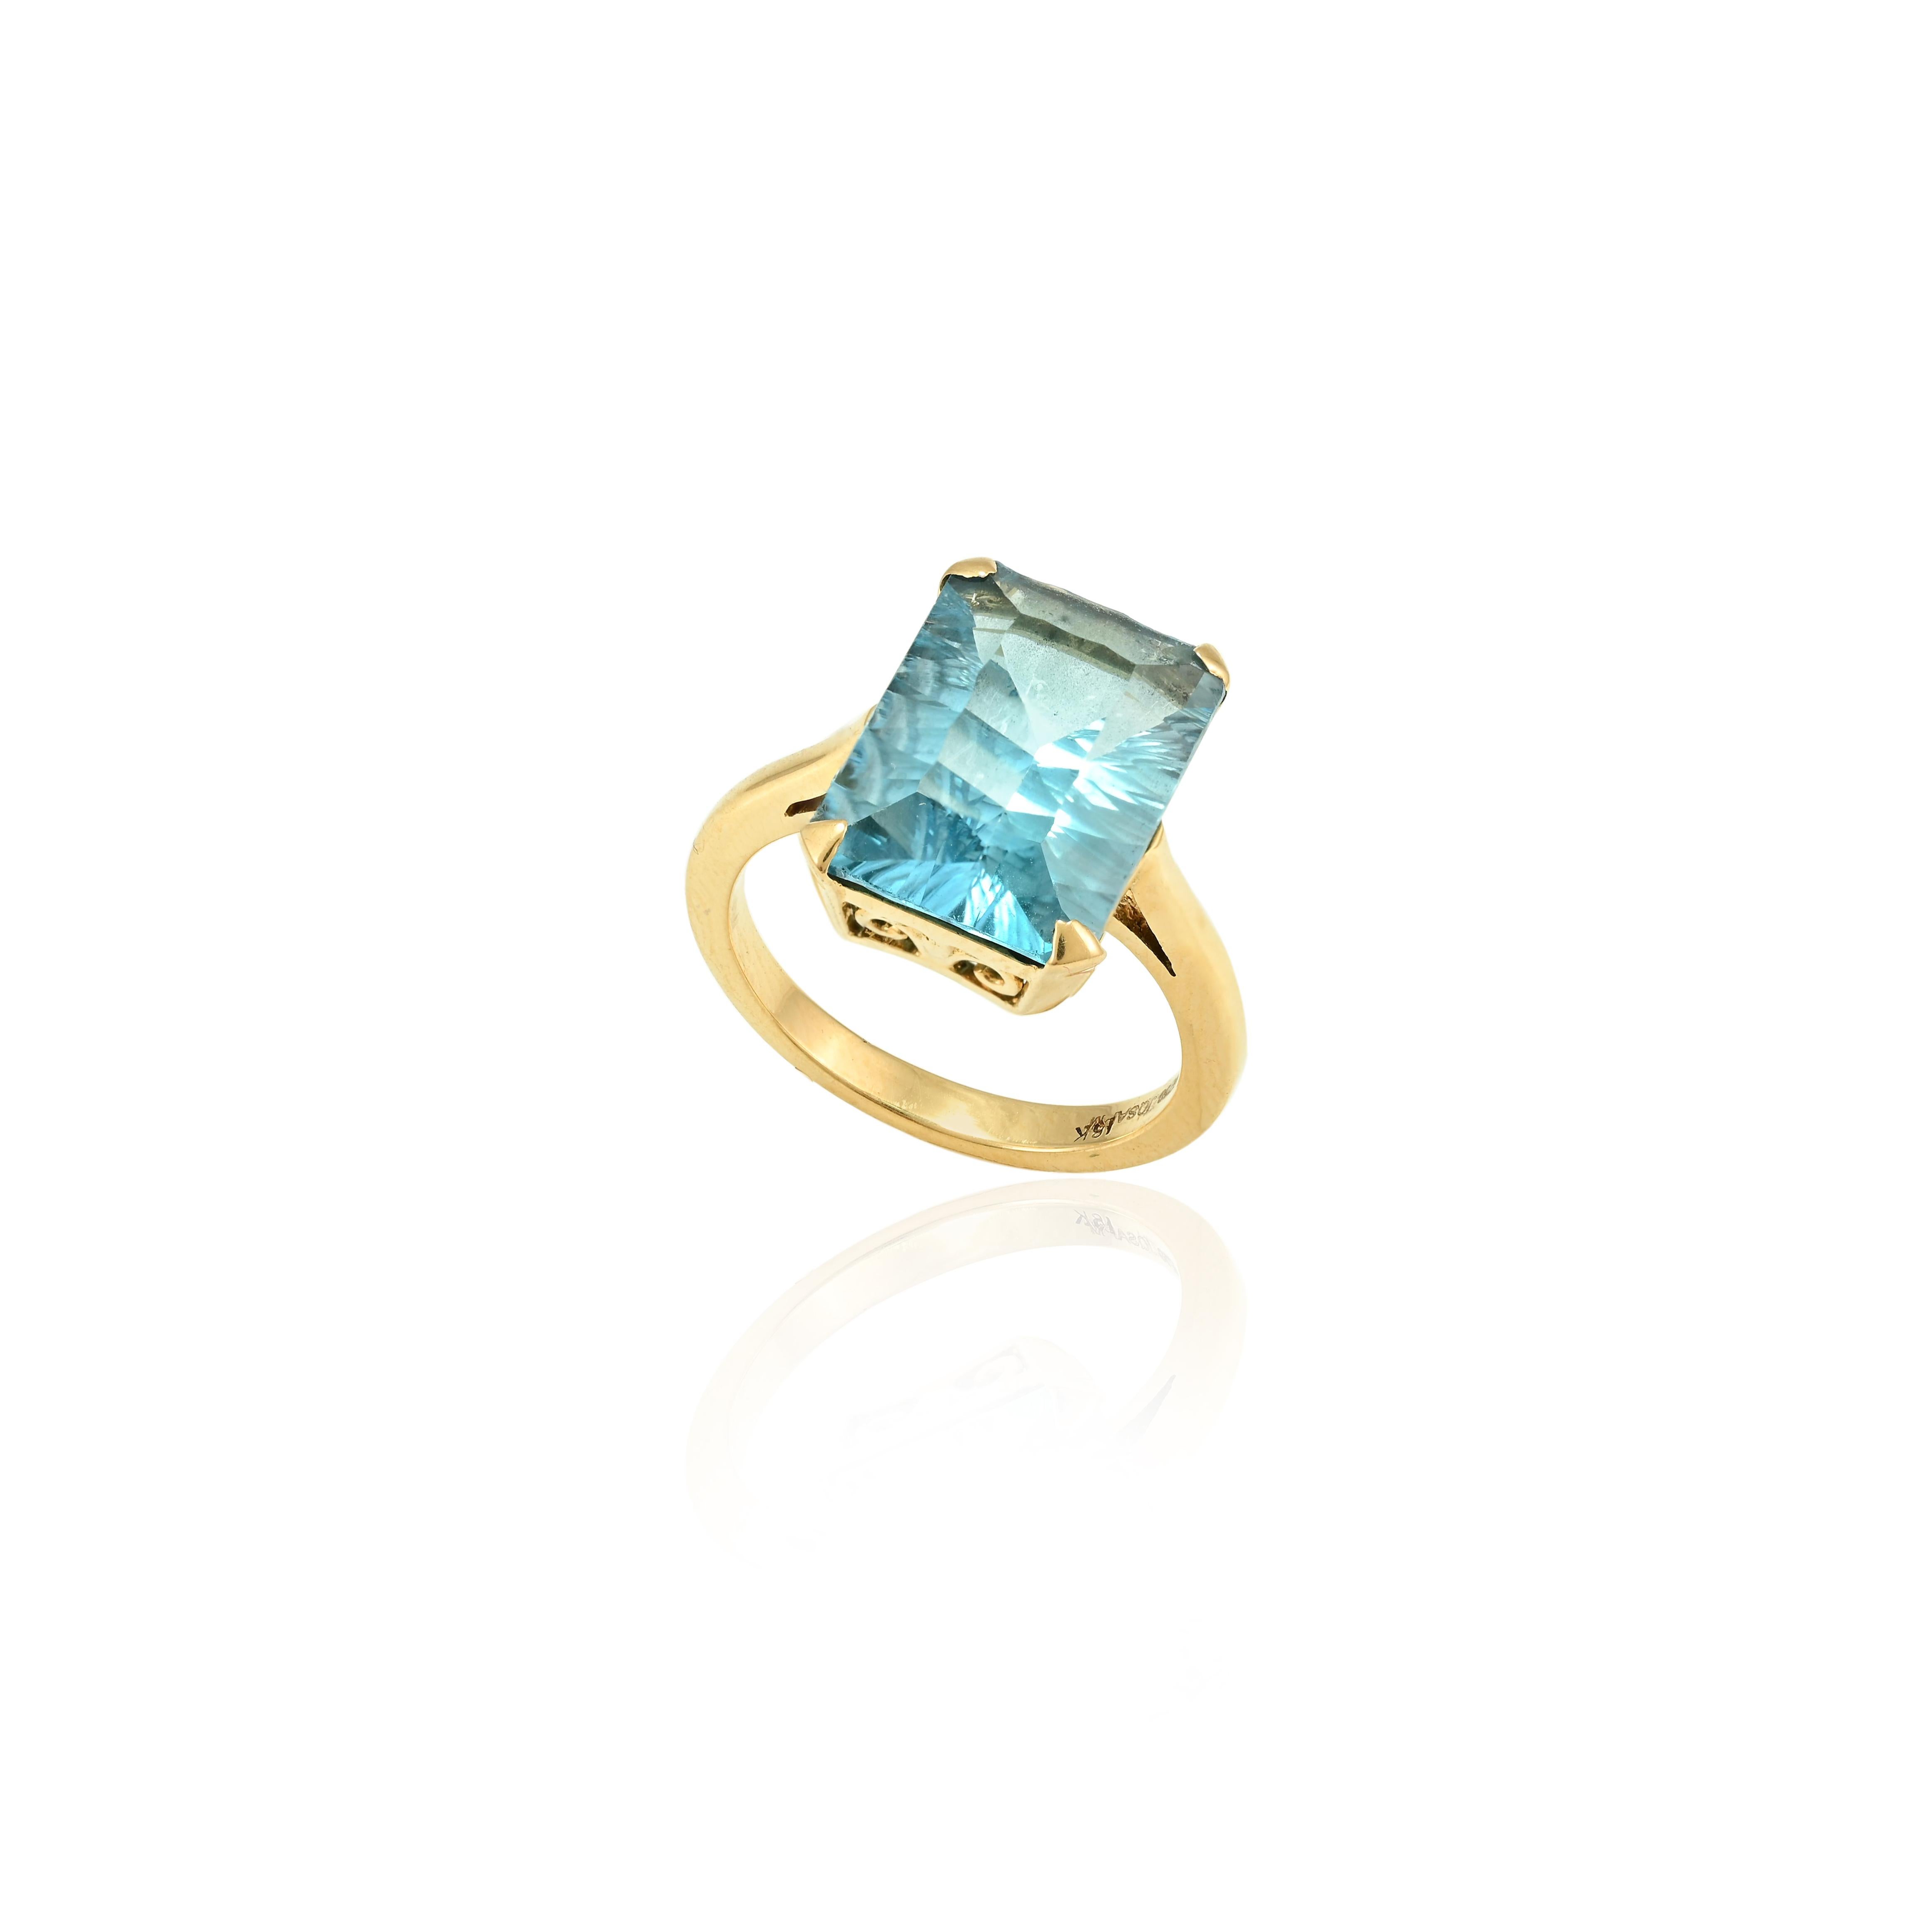 For Sale:  7.2 CTW Octagon Cut Swiss Blue Topaz Single Stone Ring 18k Solid Yellow Gold 7